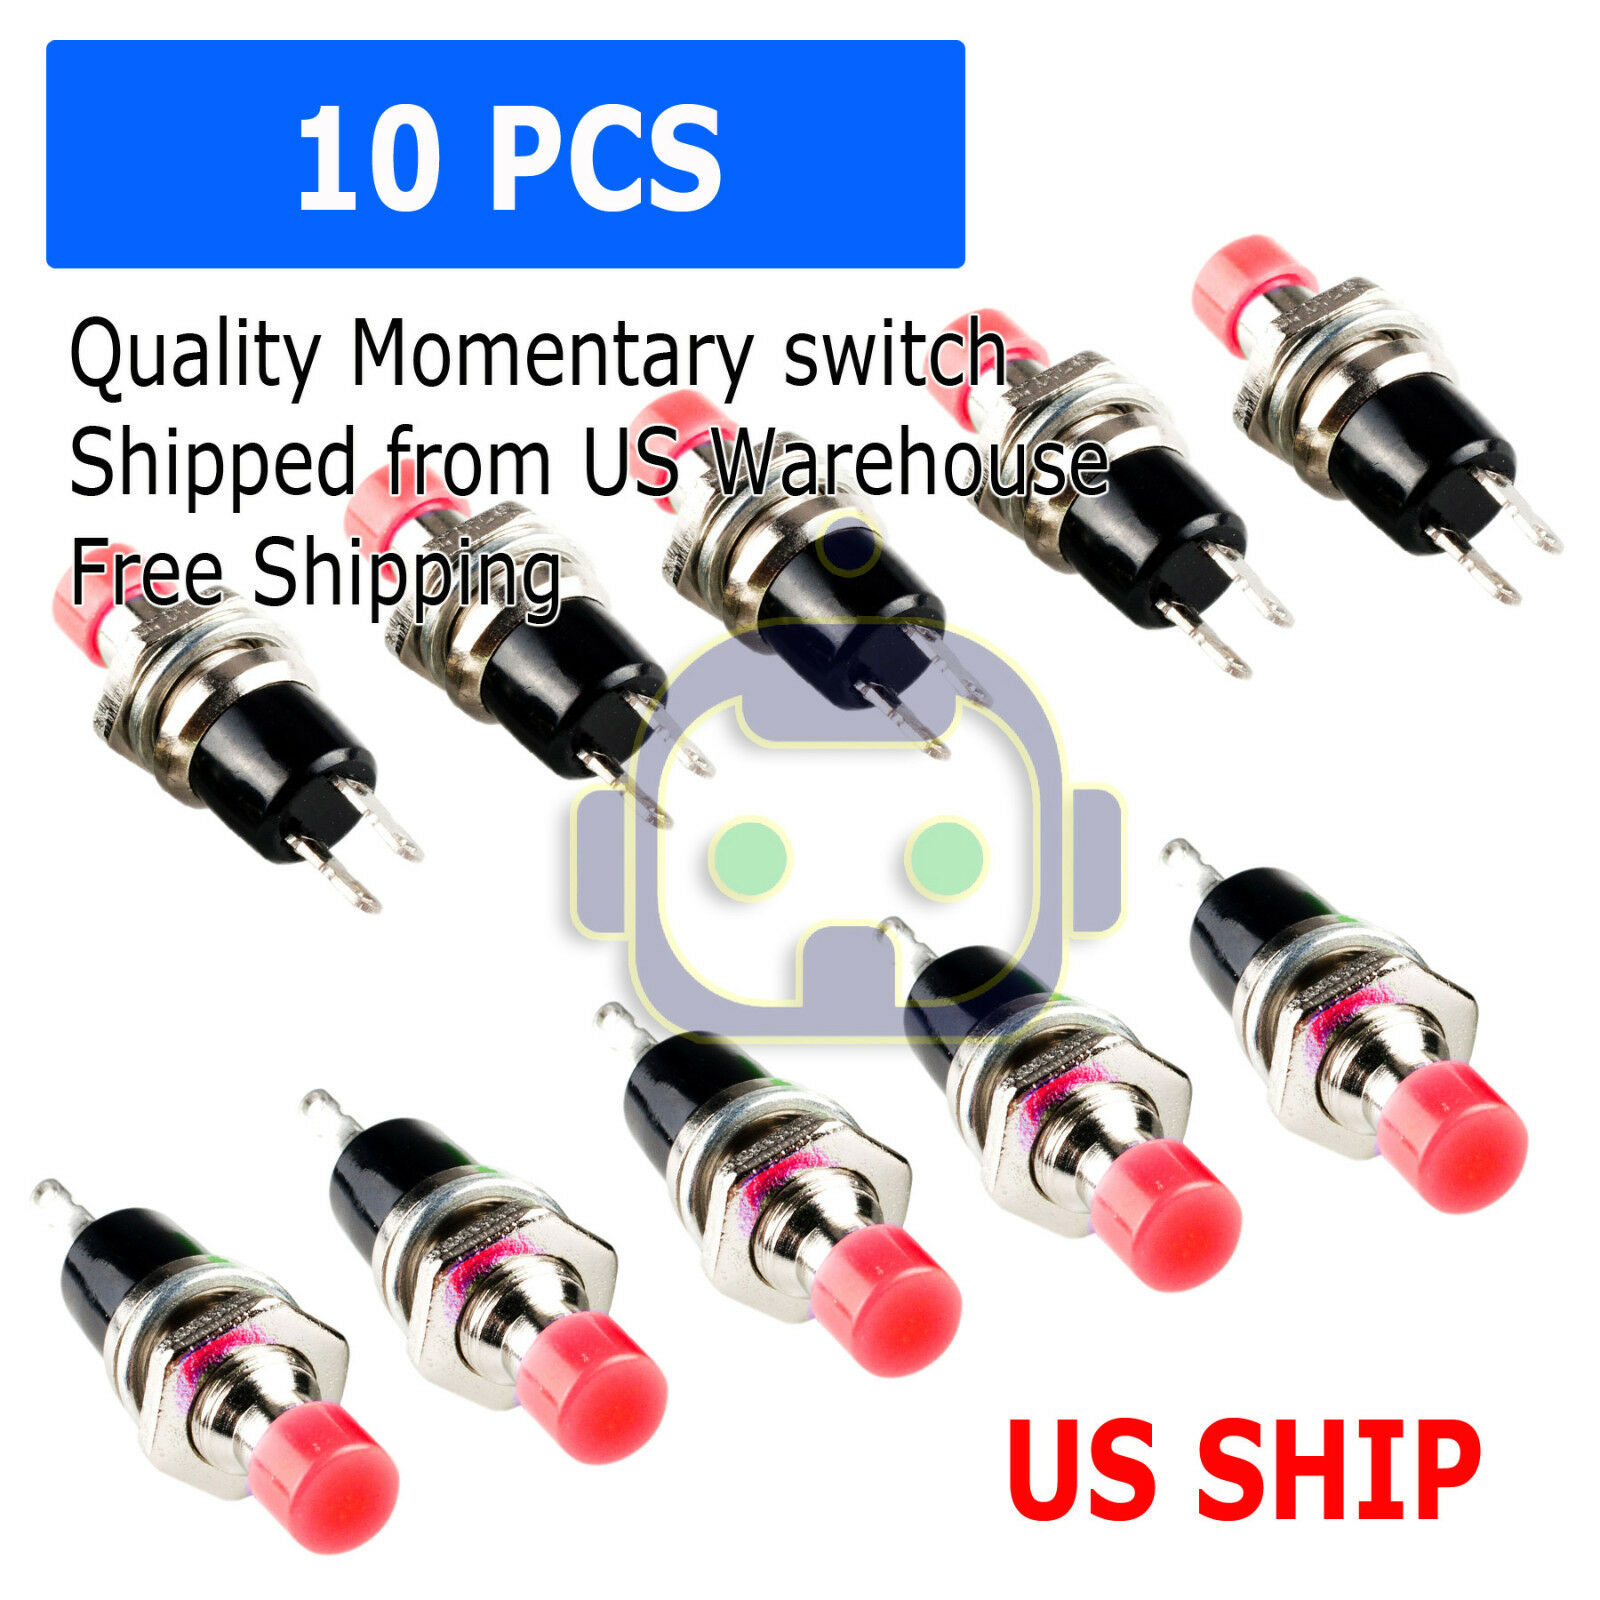 10pcs Lockless Momentary On/off Push Button Red Mini Switch Pbs-110 M121